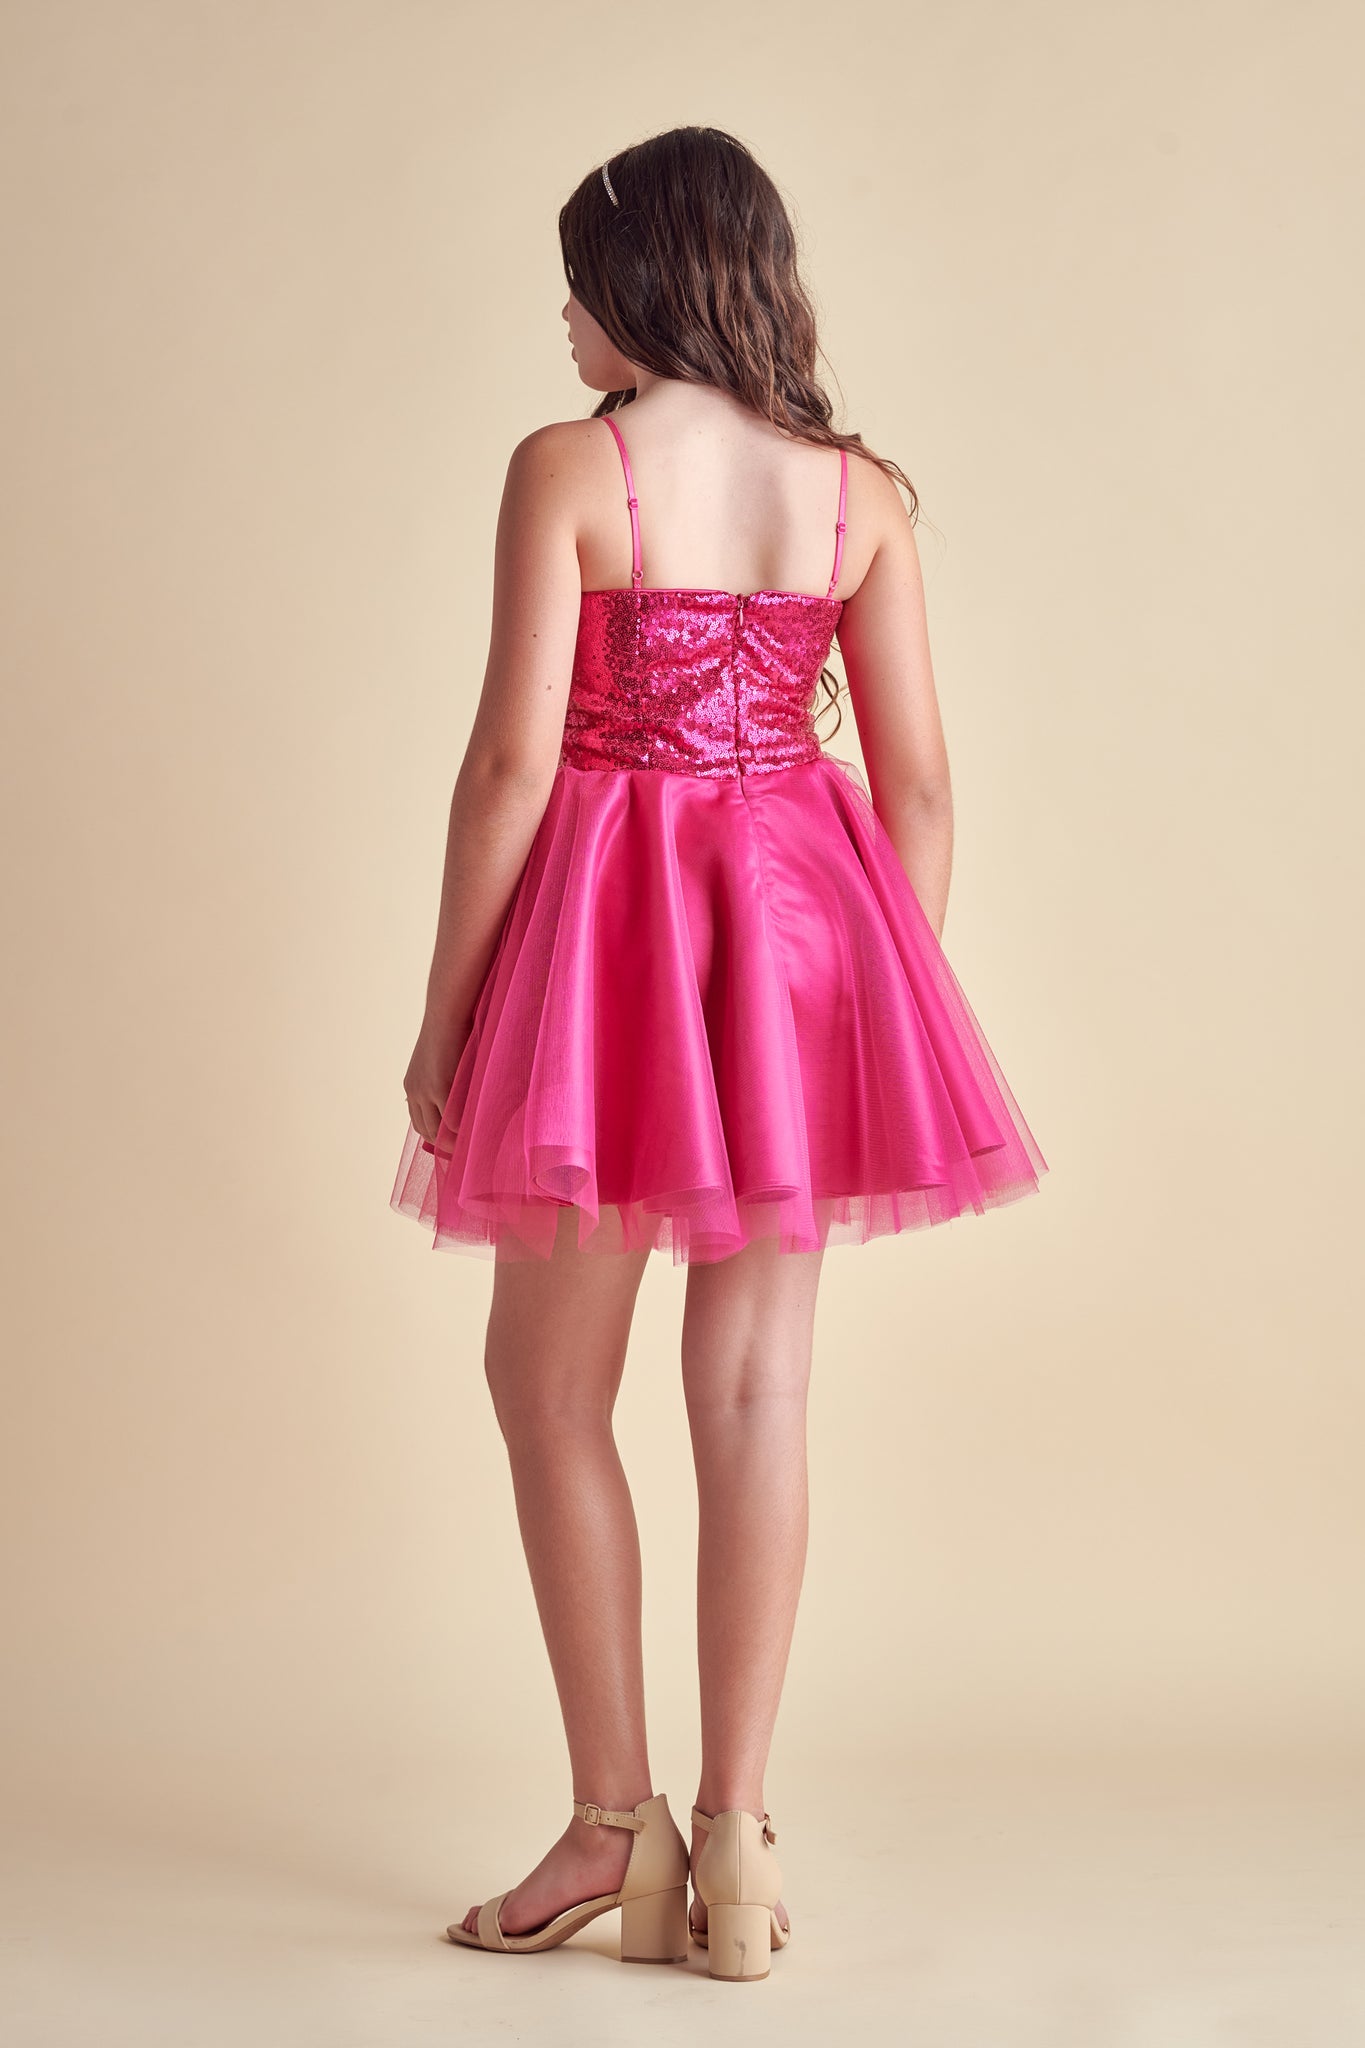 This is sequin bodice dress in fuchsia pink with full tulle skirt with adjustable straps. Hits above the knee with zipper back detailing. This perfect bat mitzvah dress or party outfit for any girl.